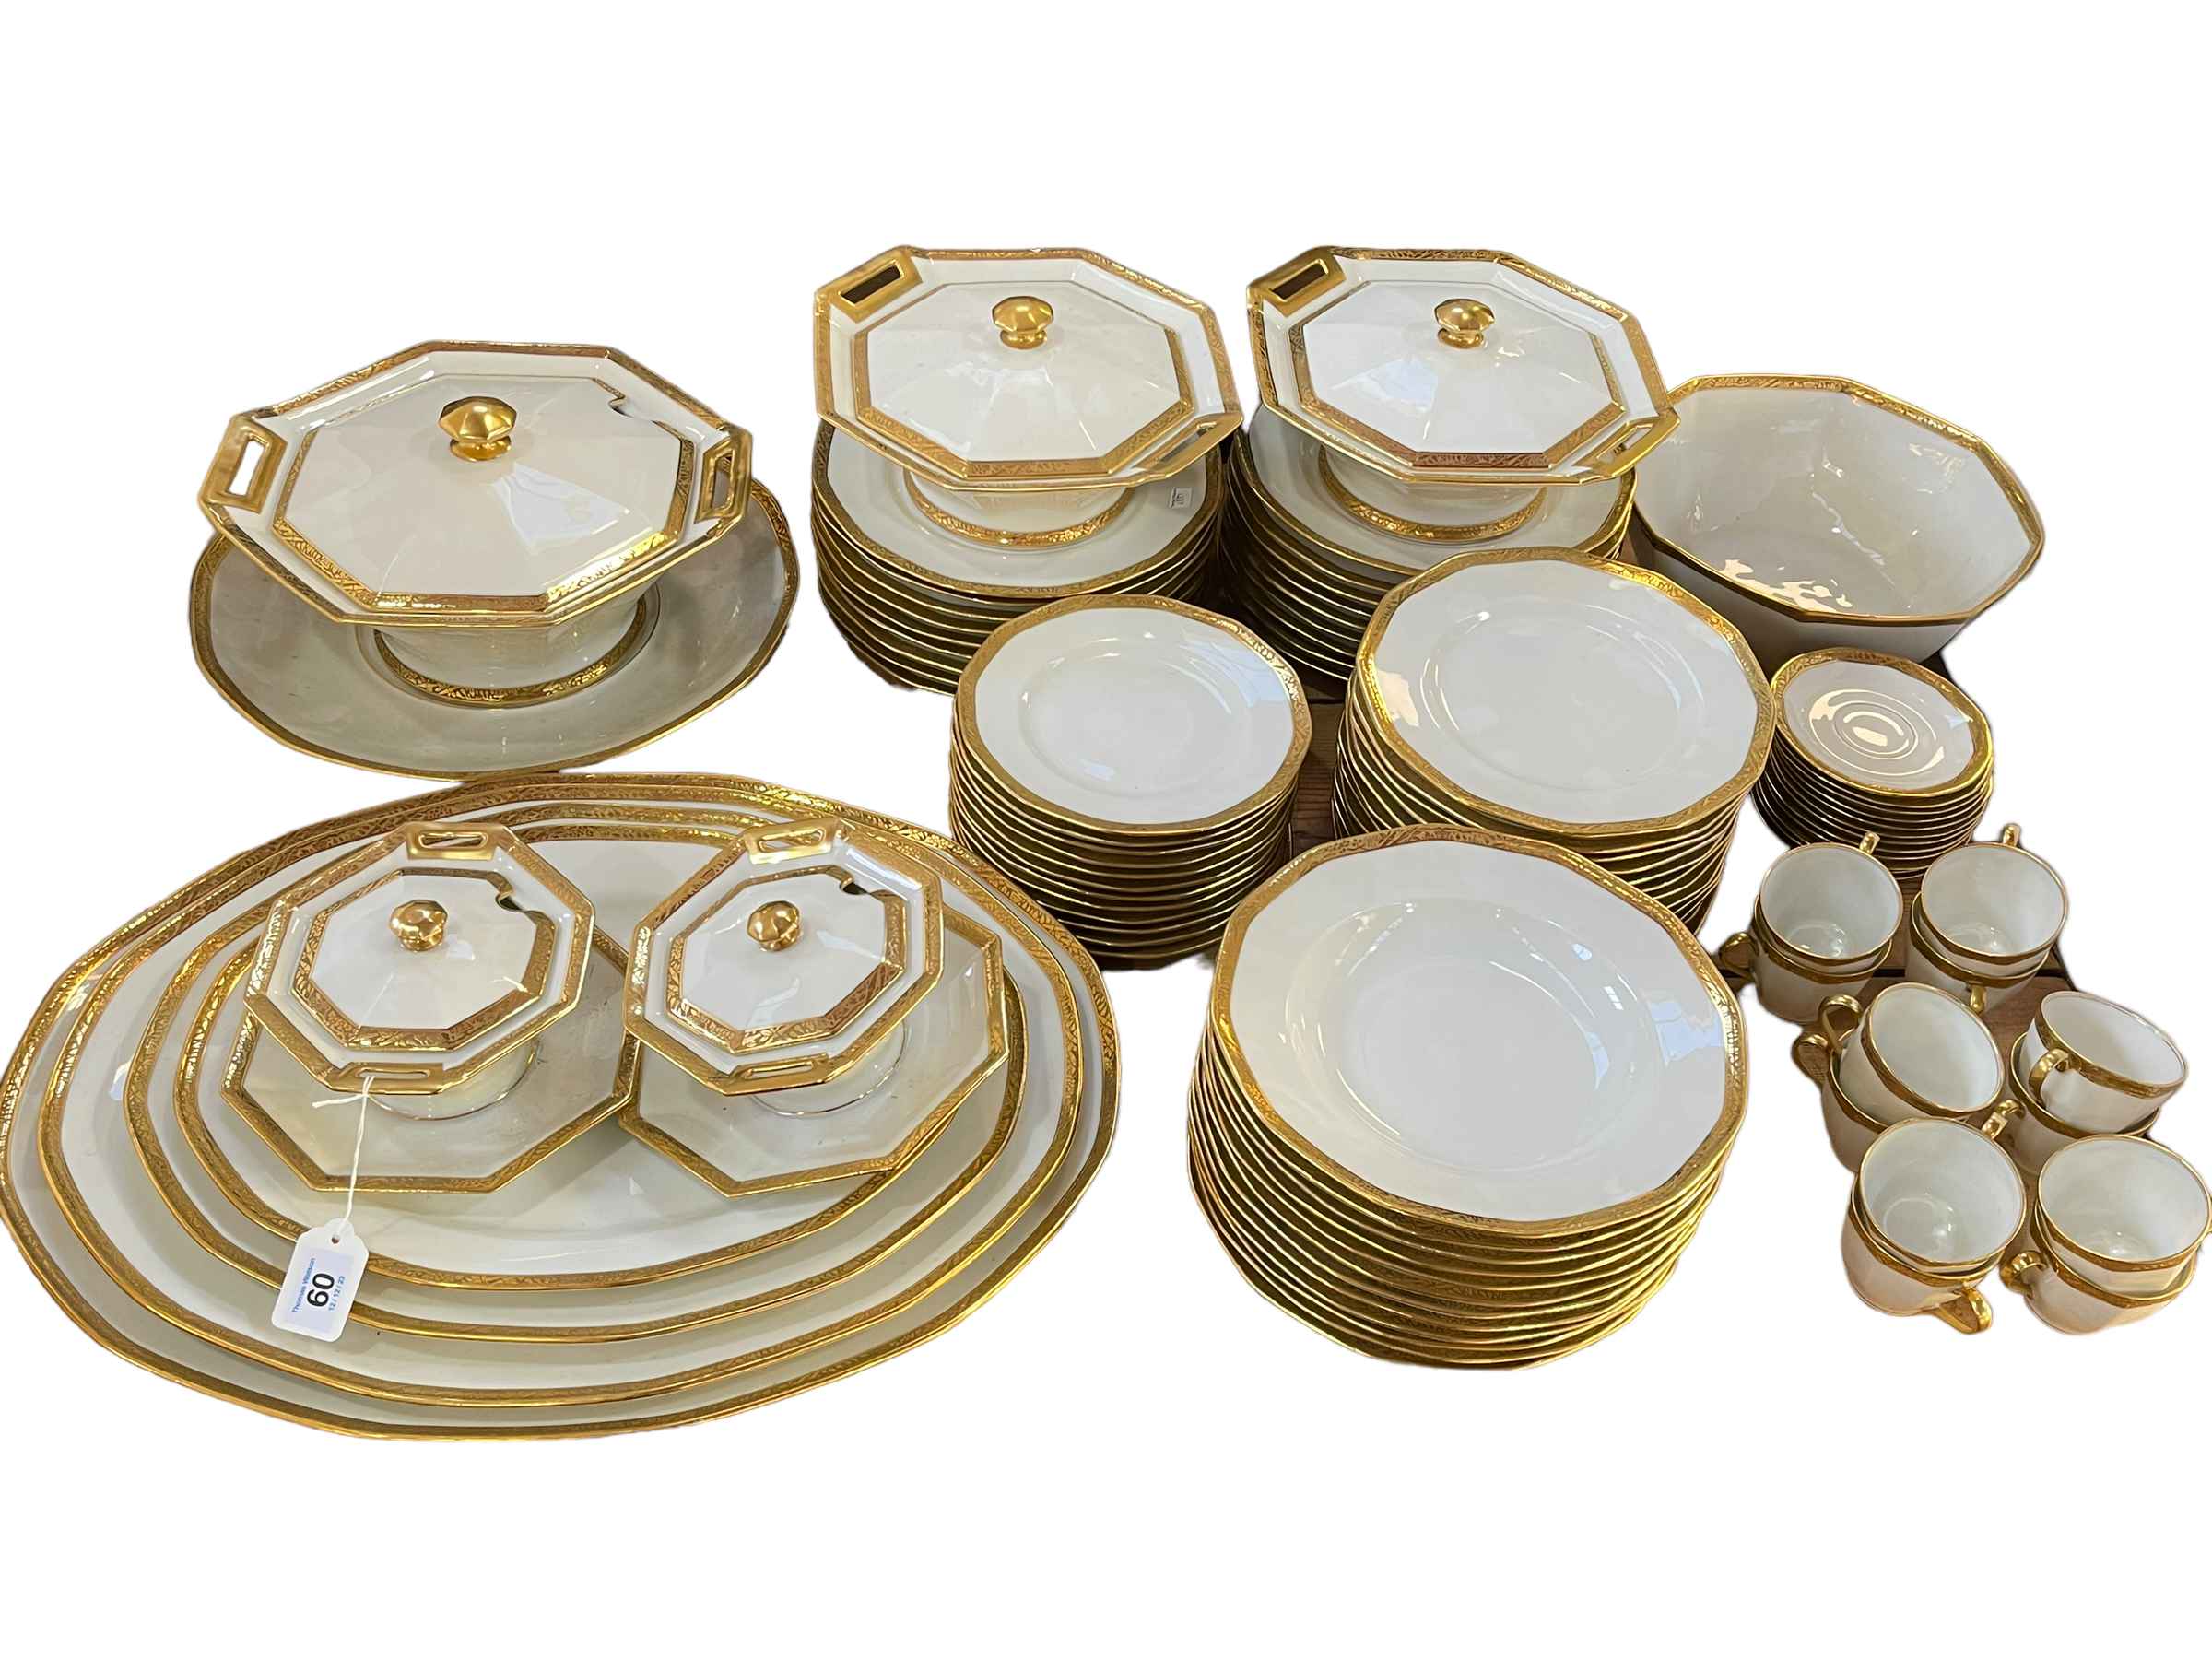 Theodore Haviland Limoges white and gold table service, approximately 85 pieces.